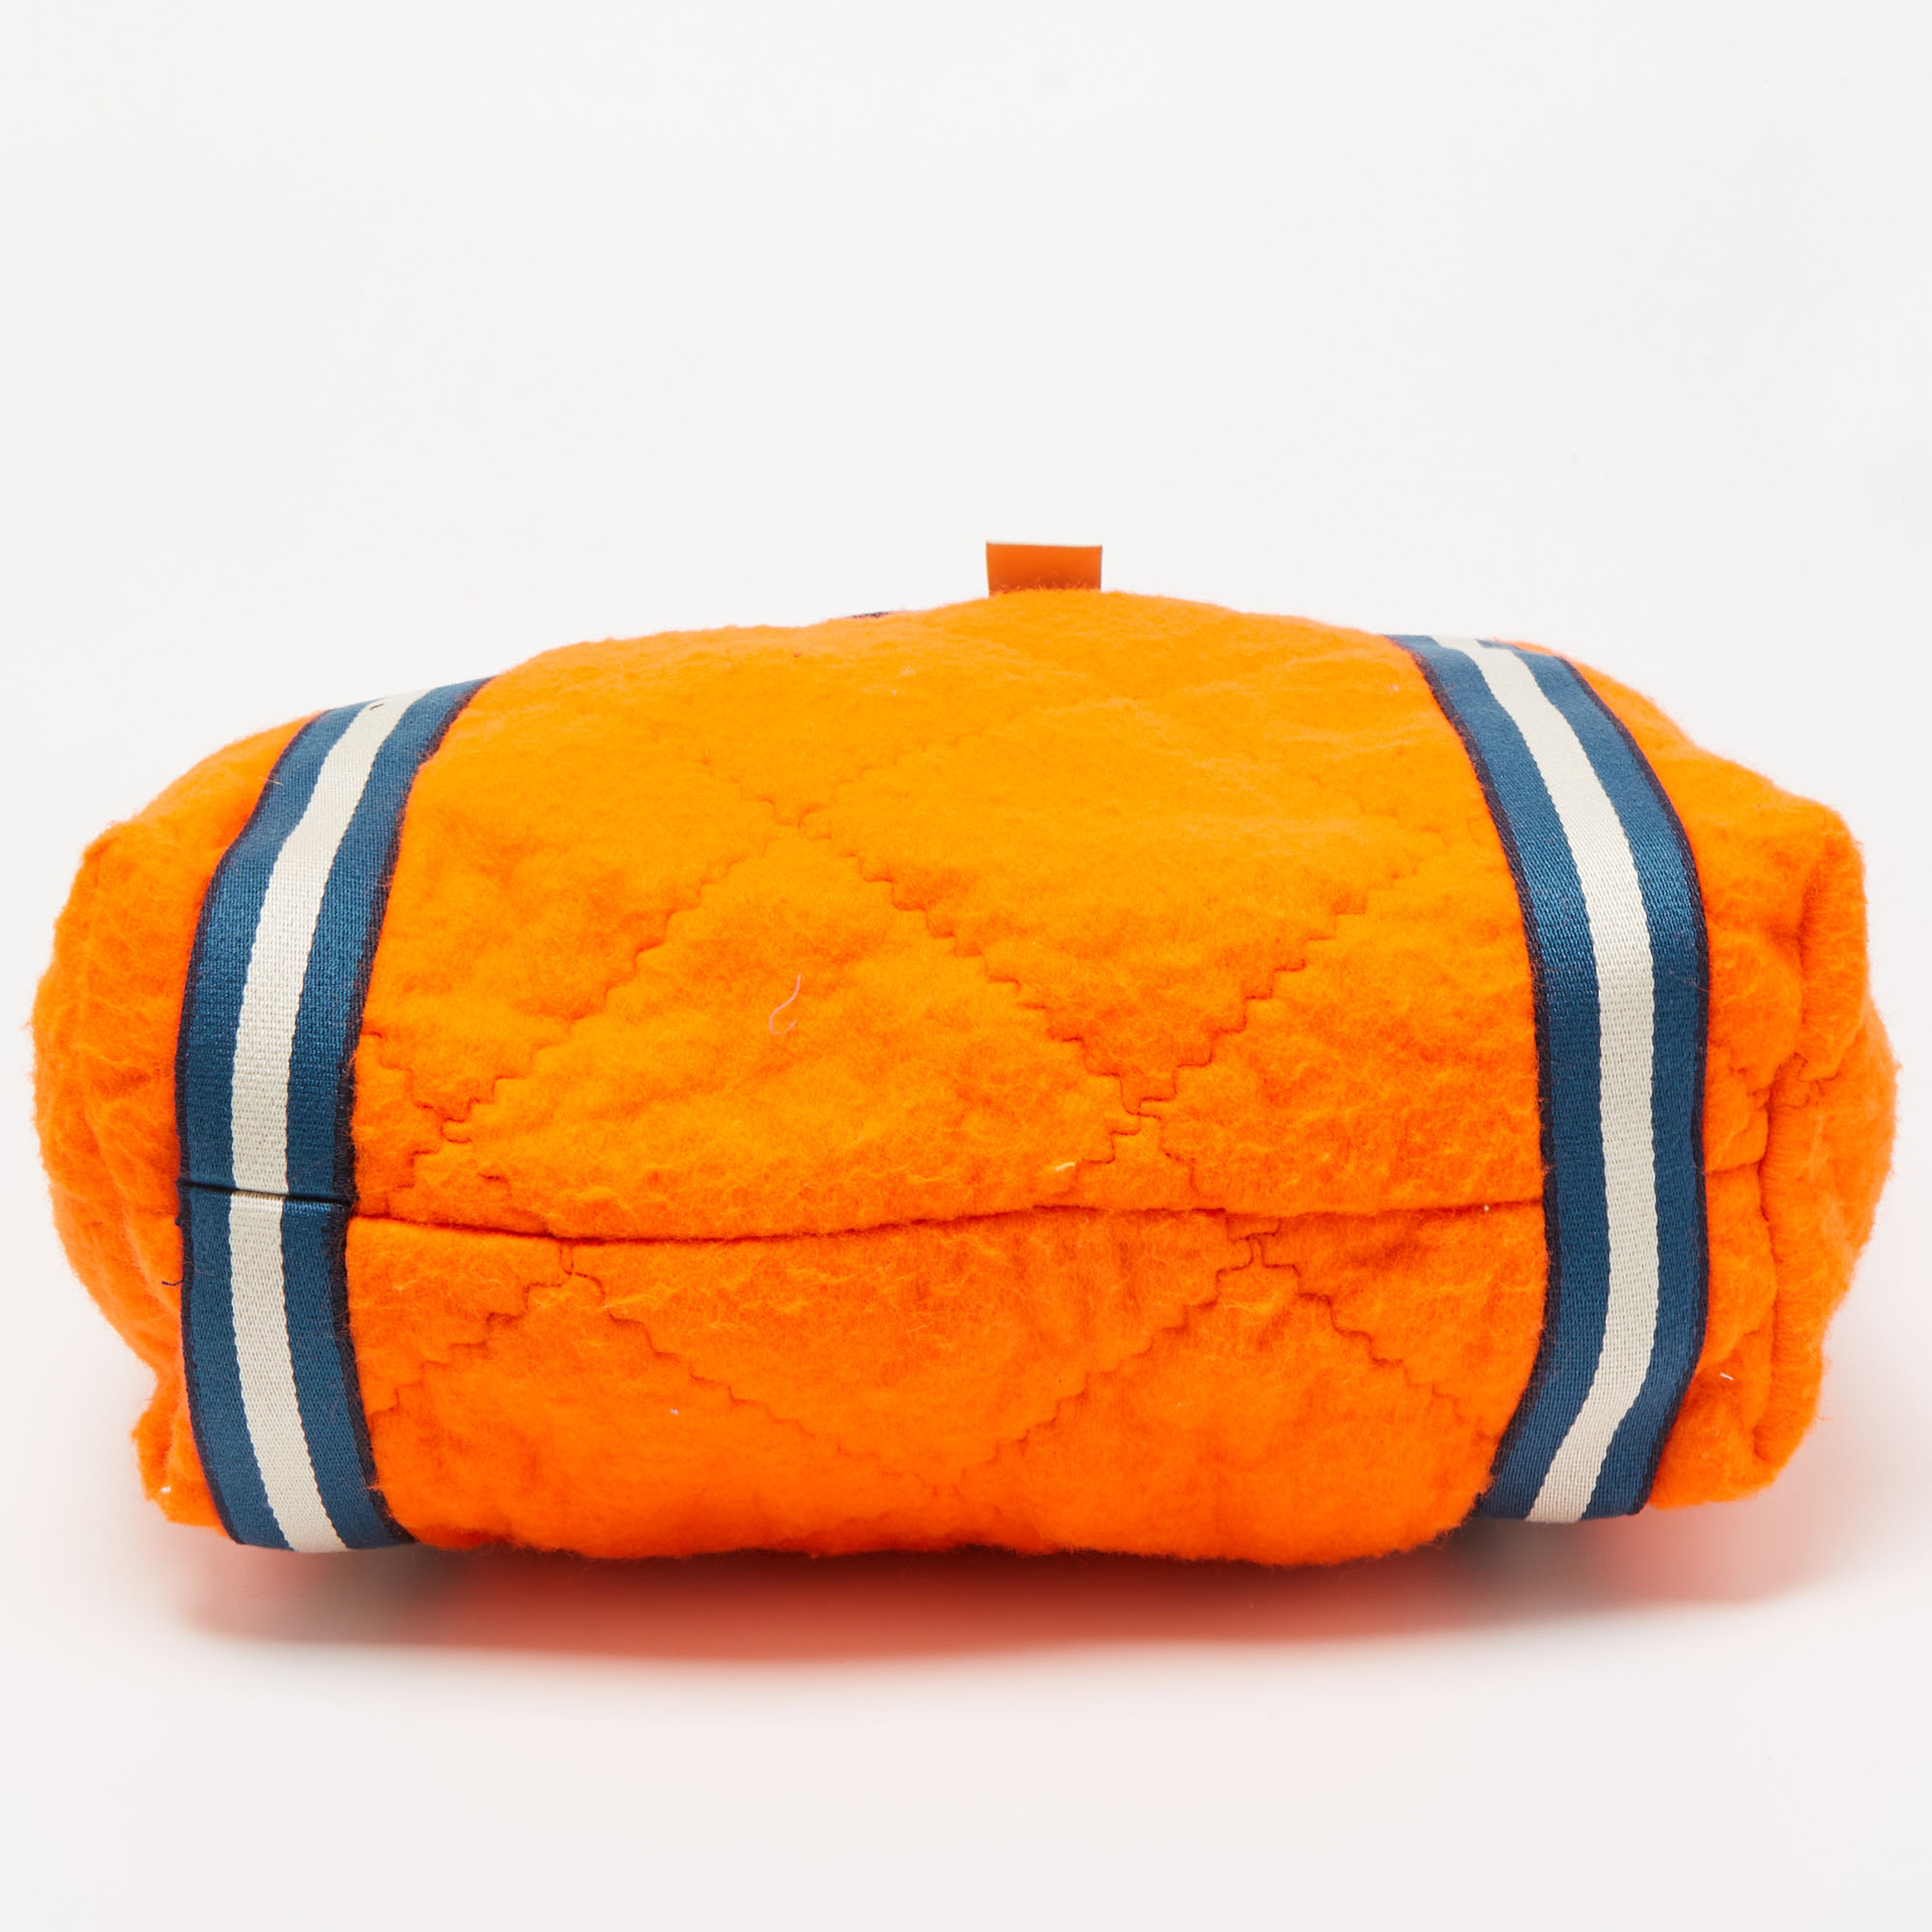 Anya Hindmarch Blue/Orange Quilted Wool And Satin It Takes A Village Collection Tote